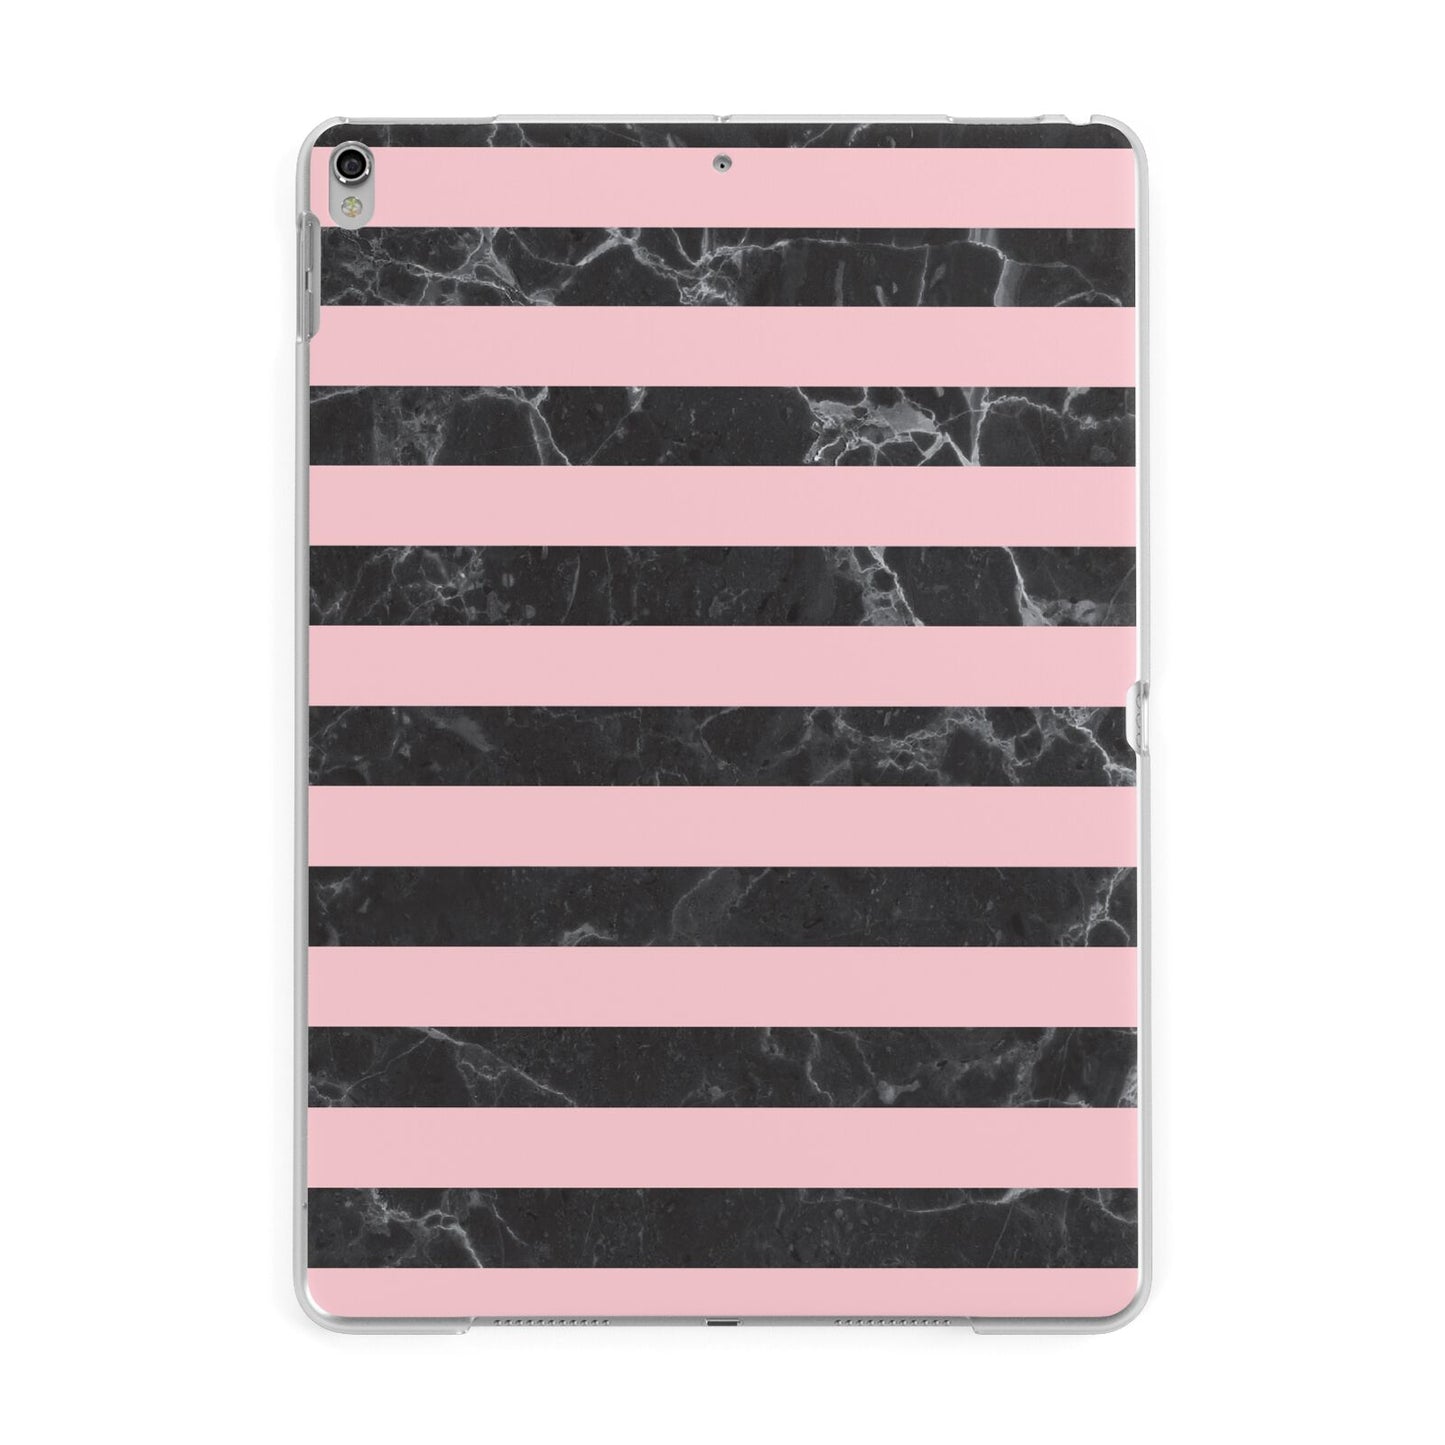 Marble Black Pink Striped Apple iPad Silver Case